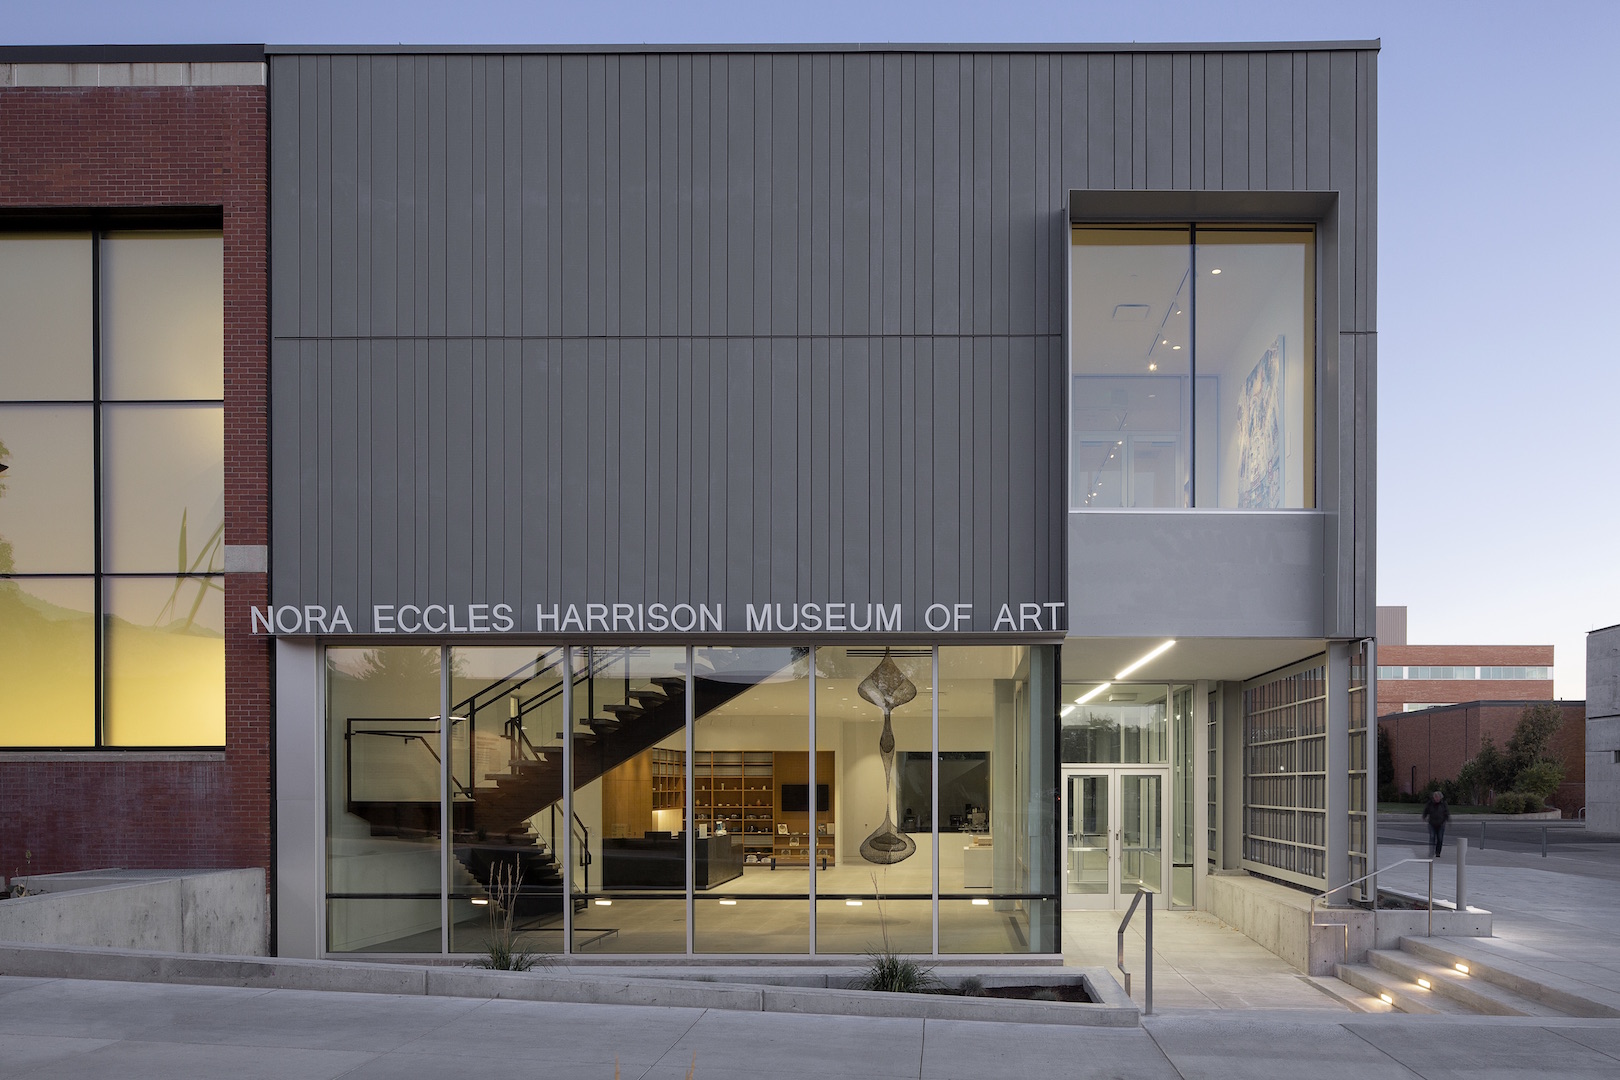 Nora Eccles Harrison Museum of Art. 2018 building renovation and expansion. Main entrance.